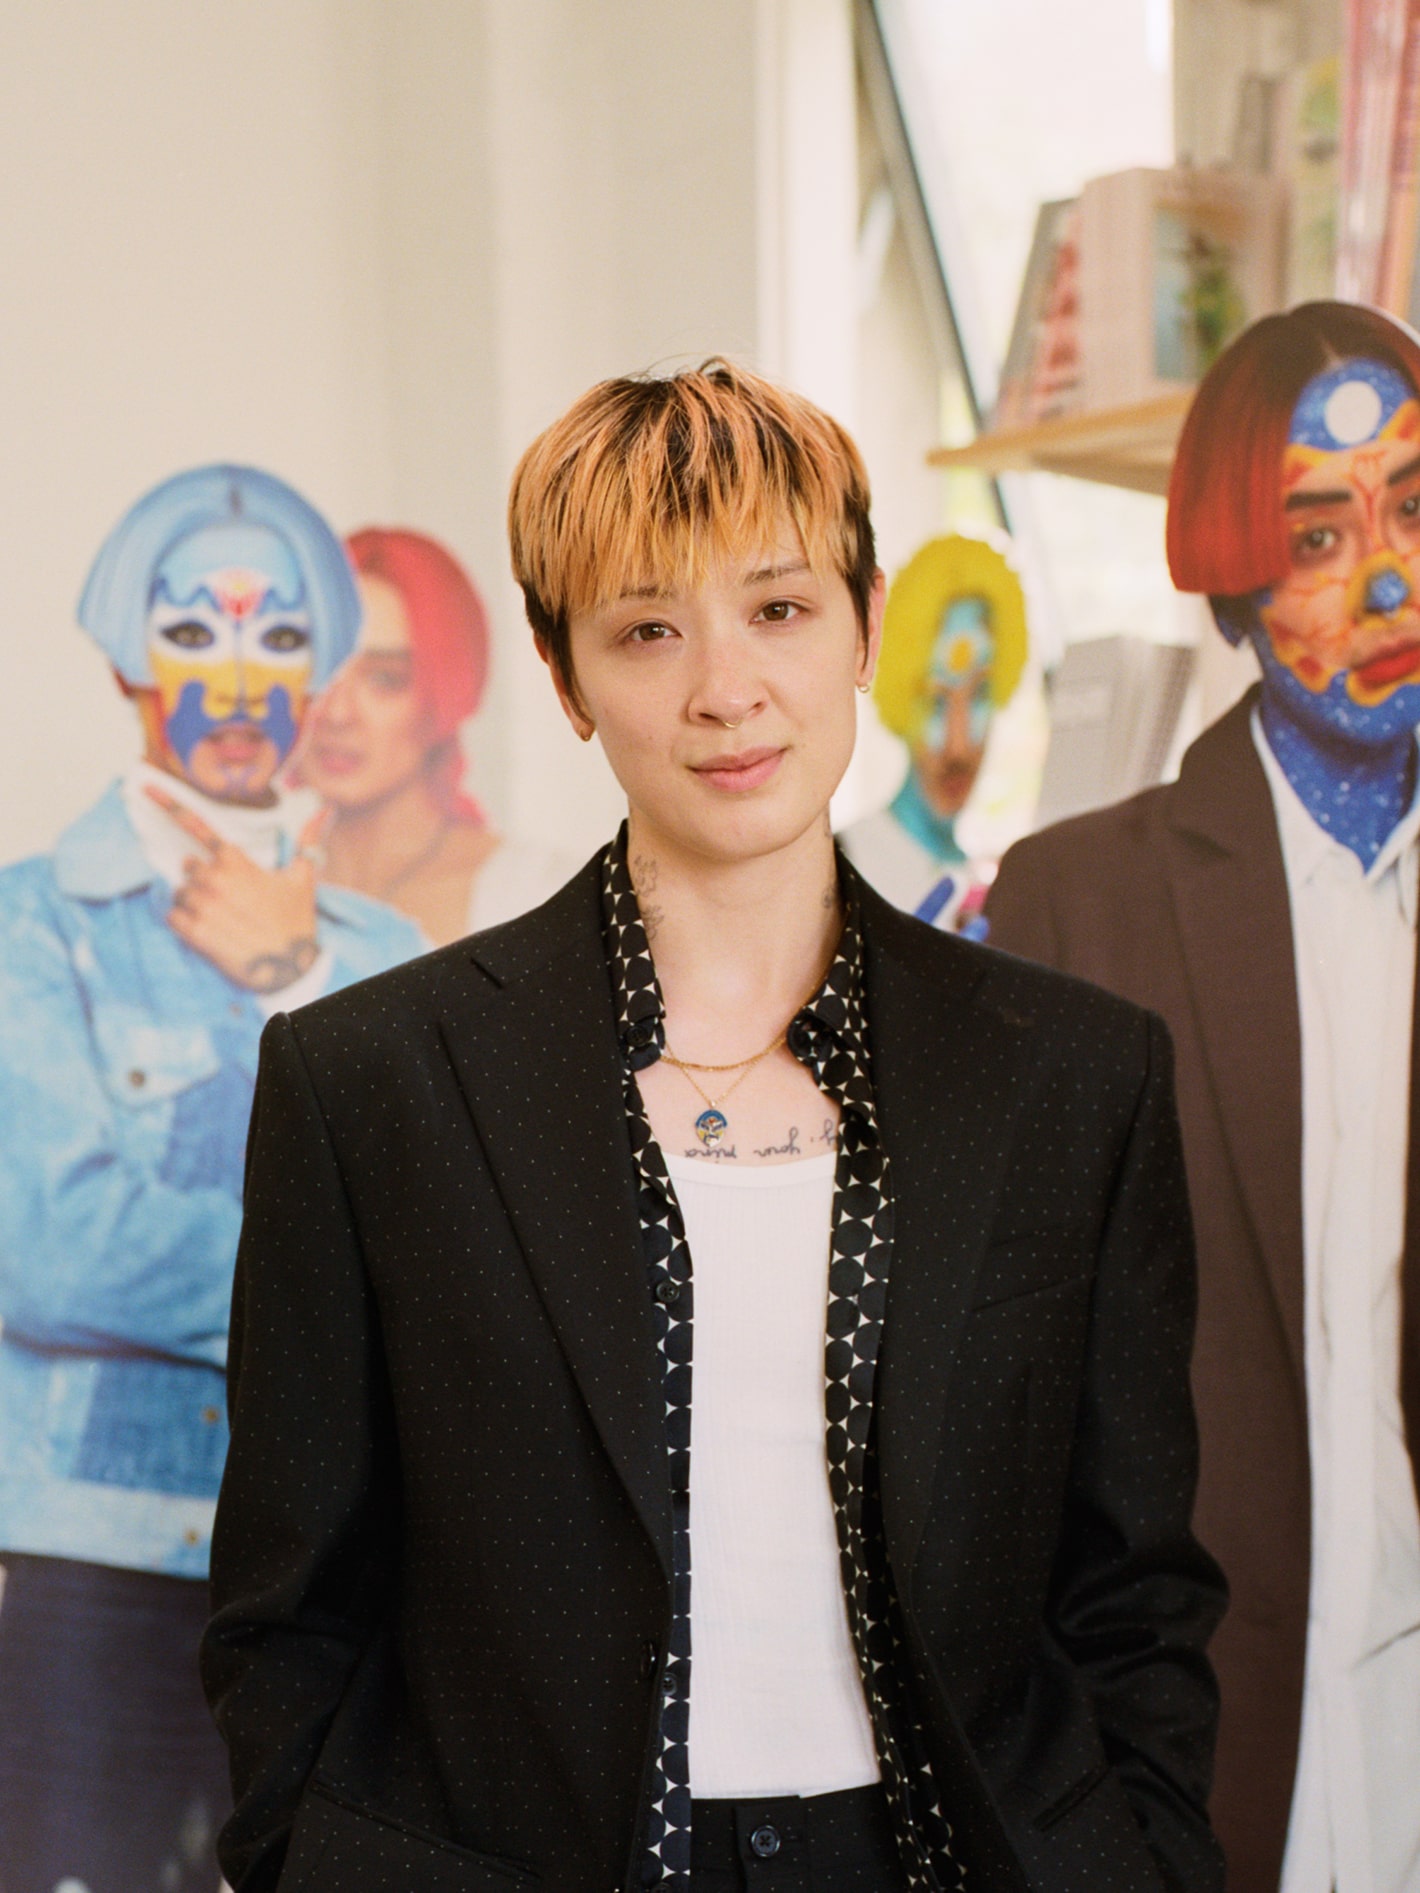 Sin Wai Kin, shortlisted for the Turner Prize 2022, will be featured in the Turner Prize exhibition at Tate Liverpool